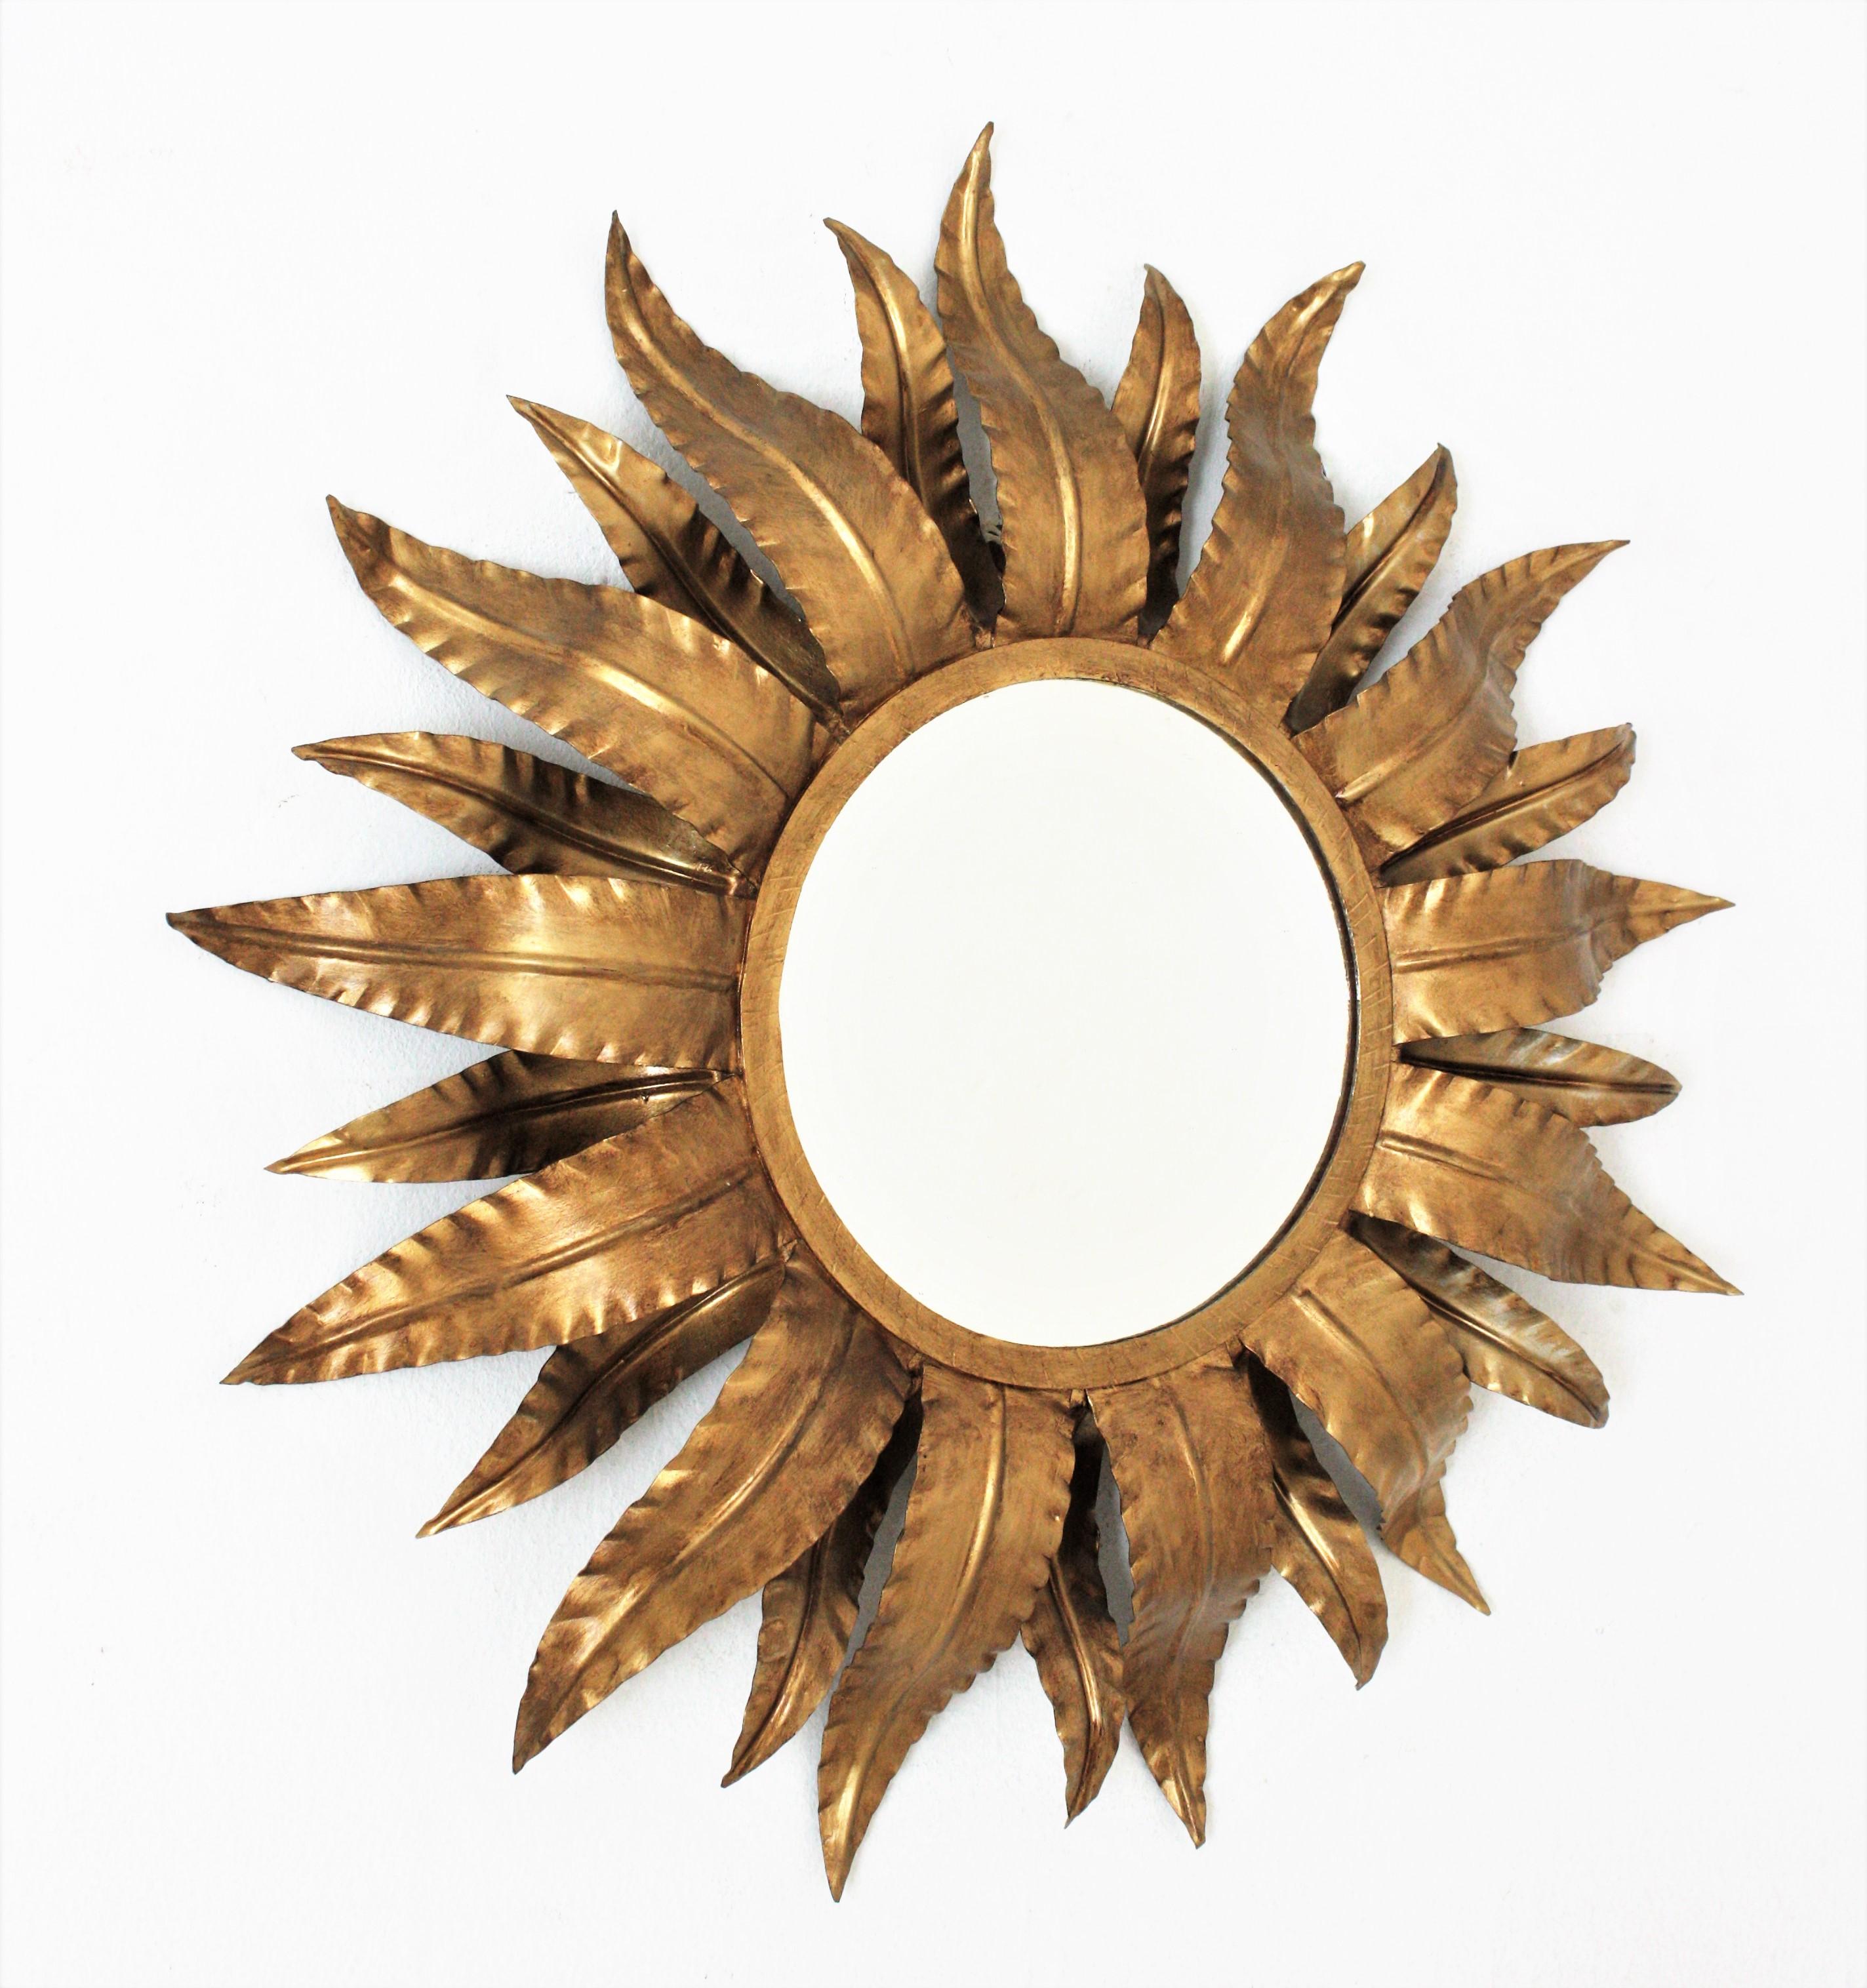 Mid-Century Modern double layered sunburst wall mirror, Spain, 1960s
This eye-catching foliage sunburst mirror features a double layer of leaves surrounding a central round glass.
It has a beautiful patina and original finish in bronze-gilt